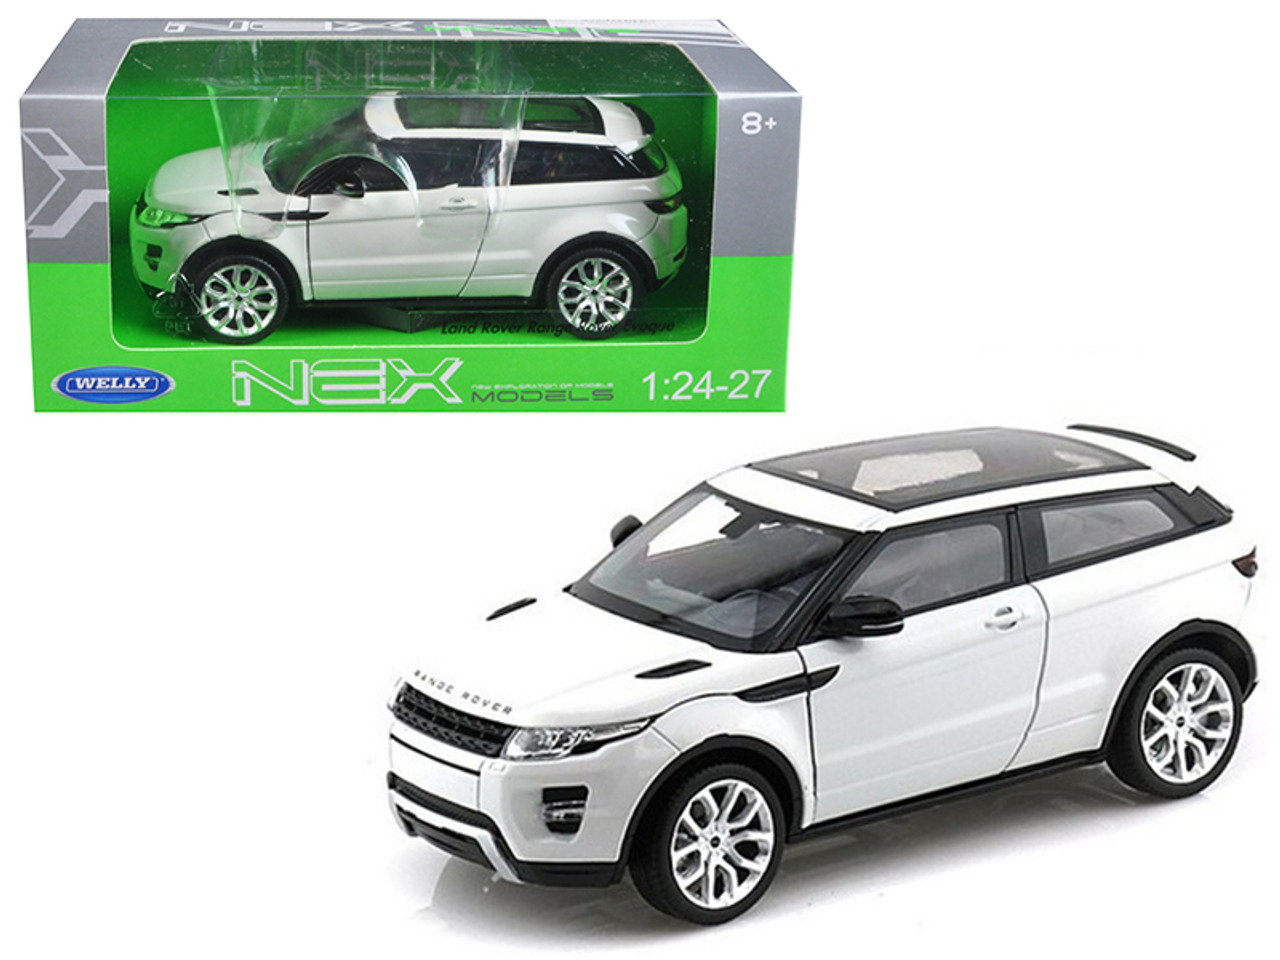 Range Rover Land Rover Evoque with Sunroof White 1/24-1/27 Diecast Model Car by Welly